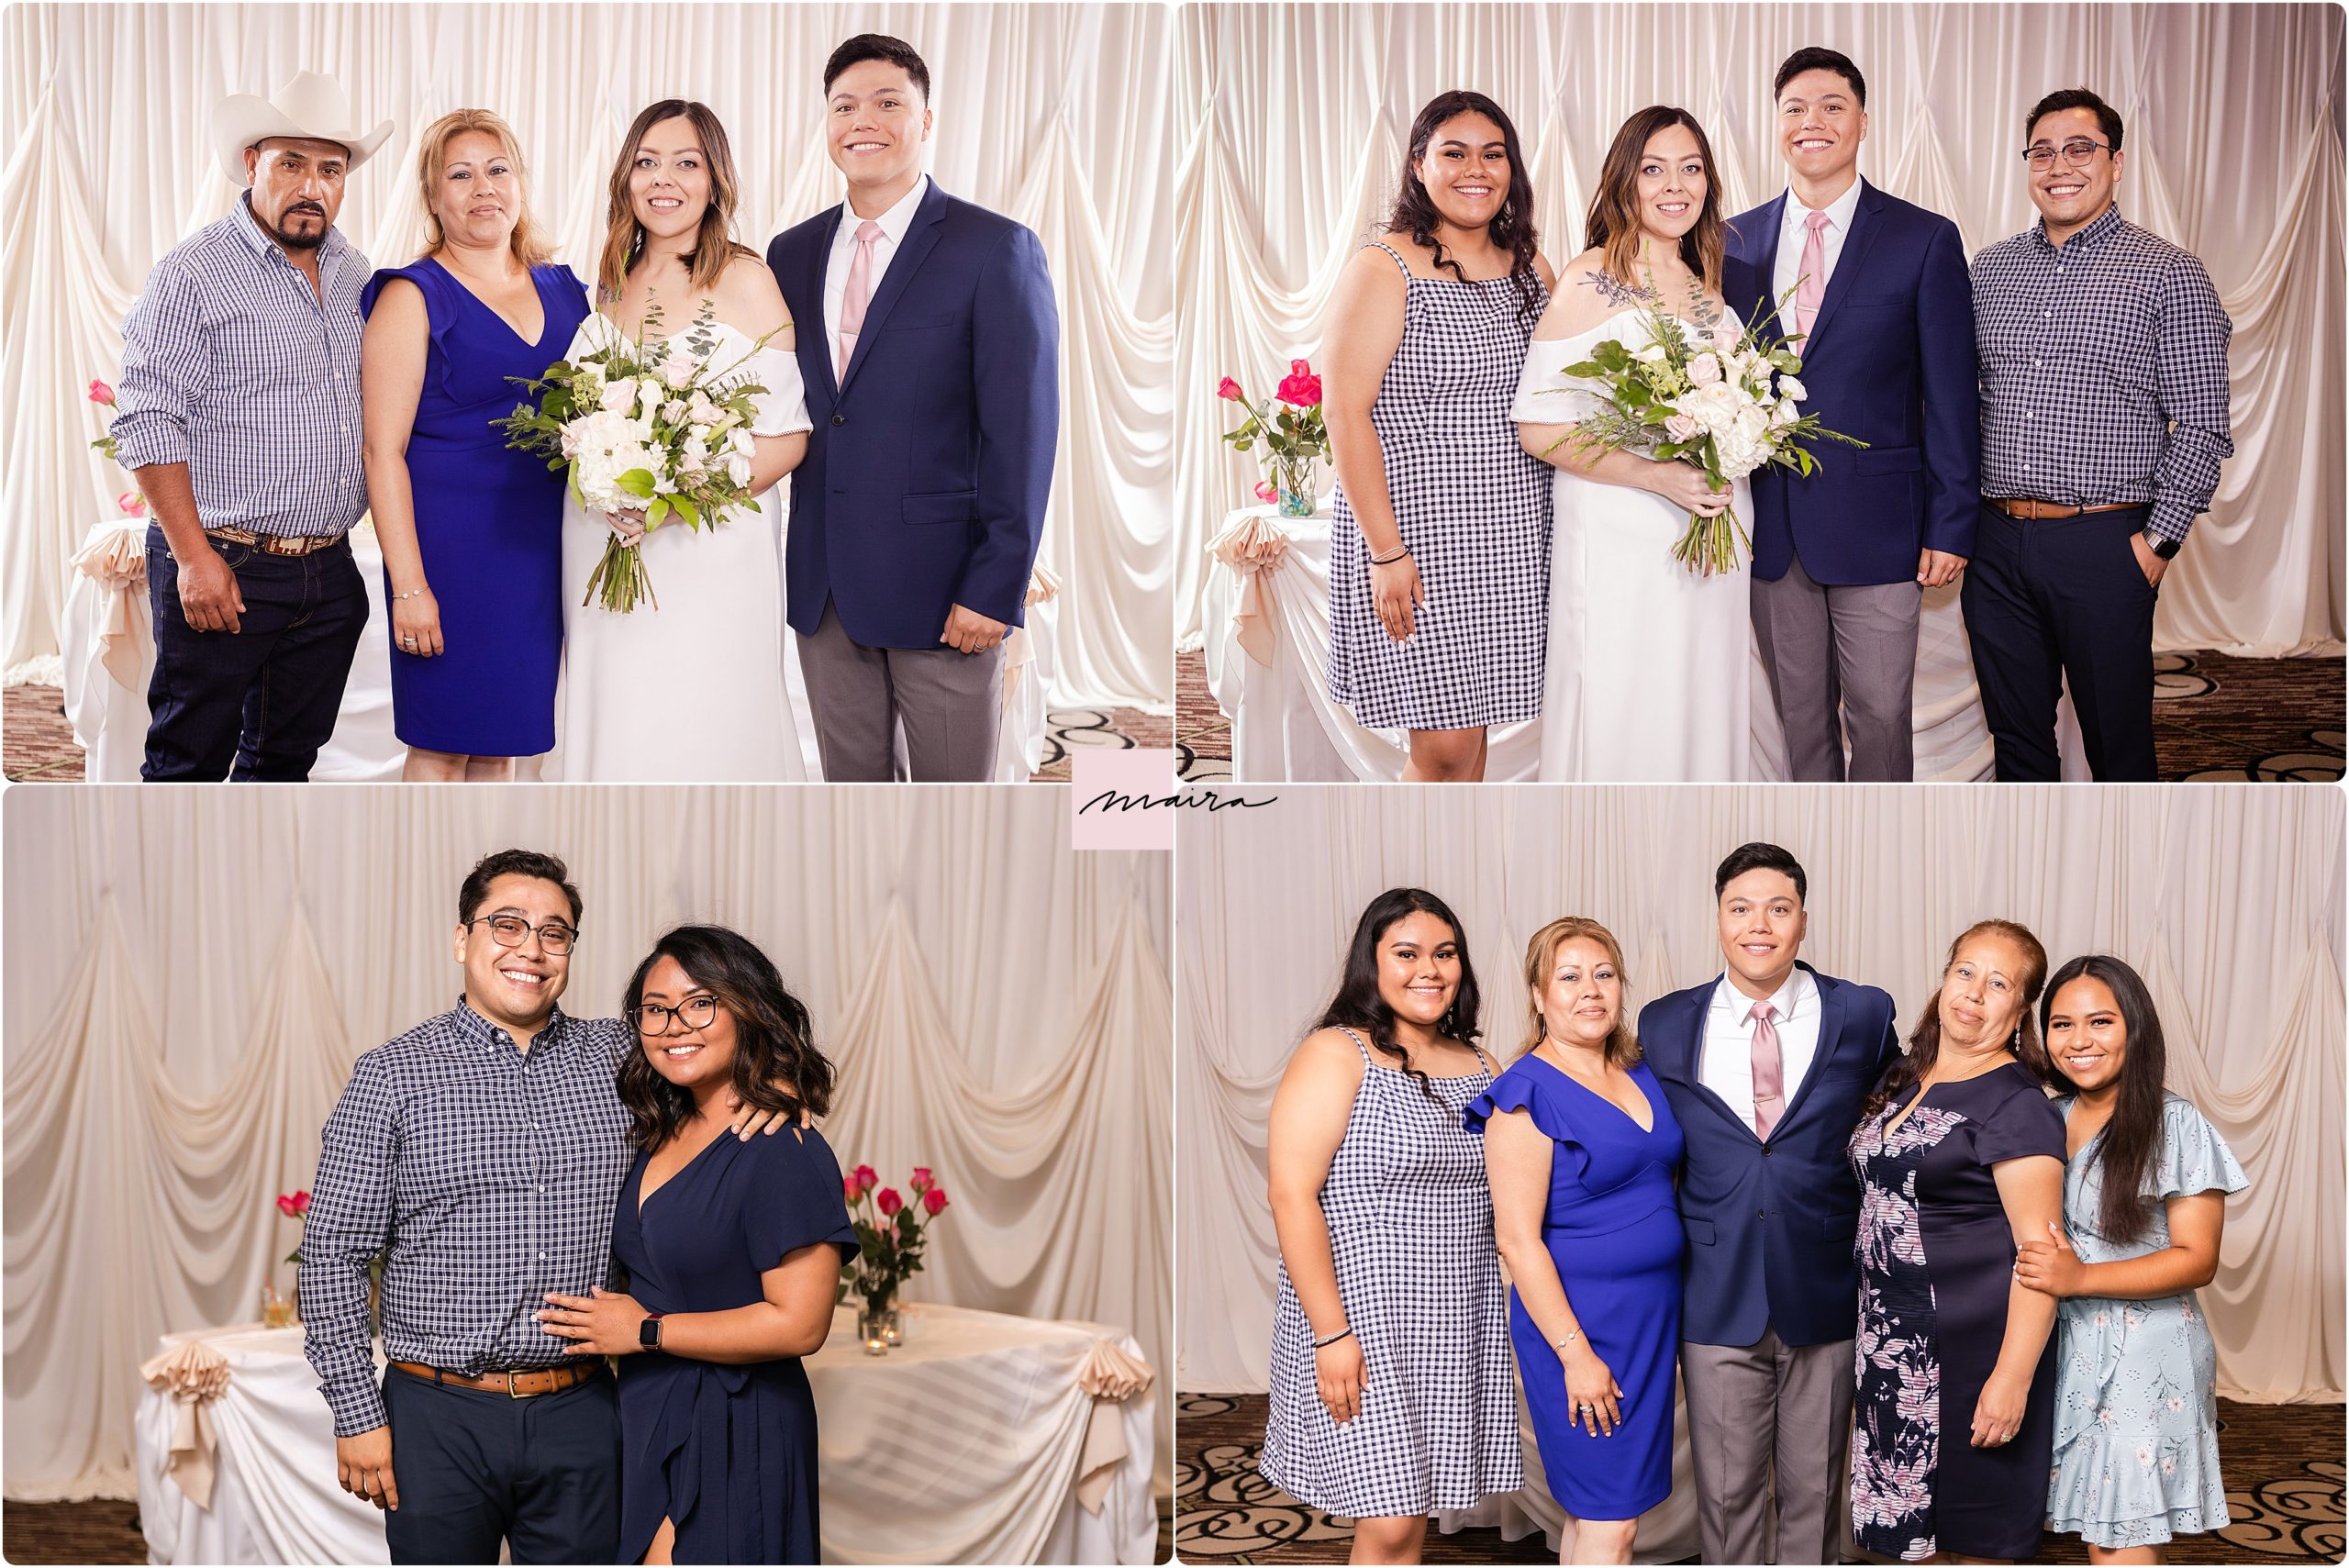 Wedding Formal Portraits, Family Formal Portraits, Wedding Formals, Friends and Family Wedding Portraits, D'Andrea Banquet Hall Crystal Lake, IL